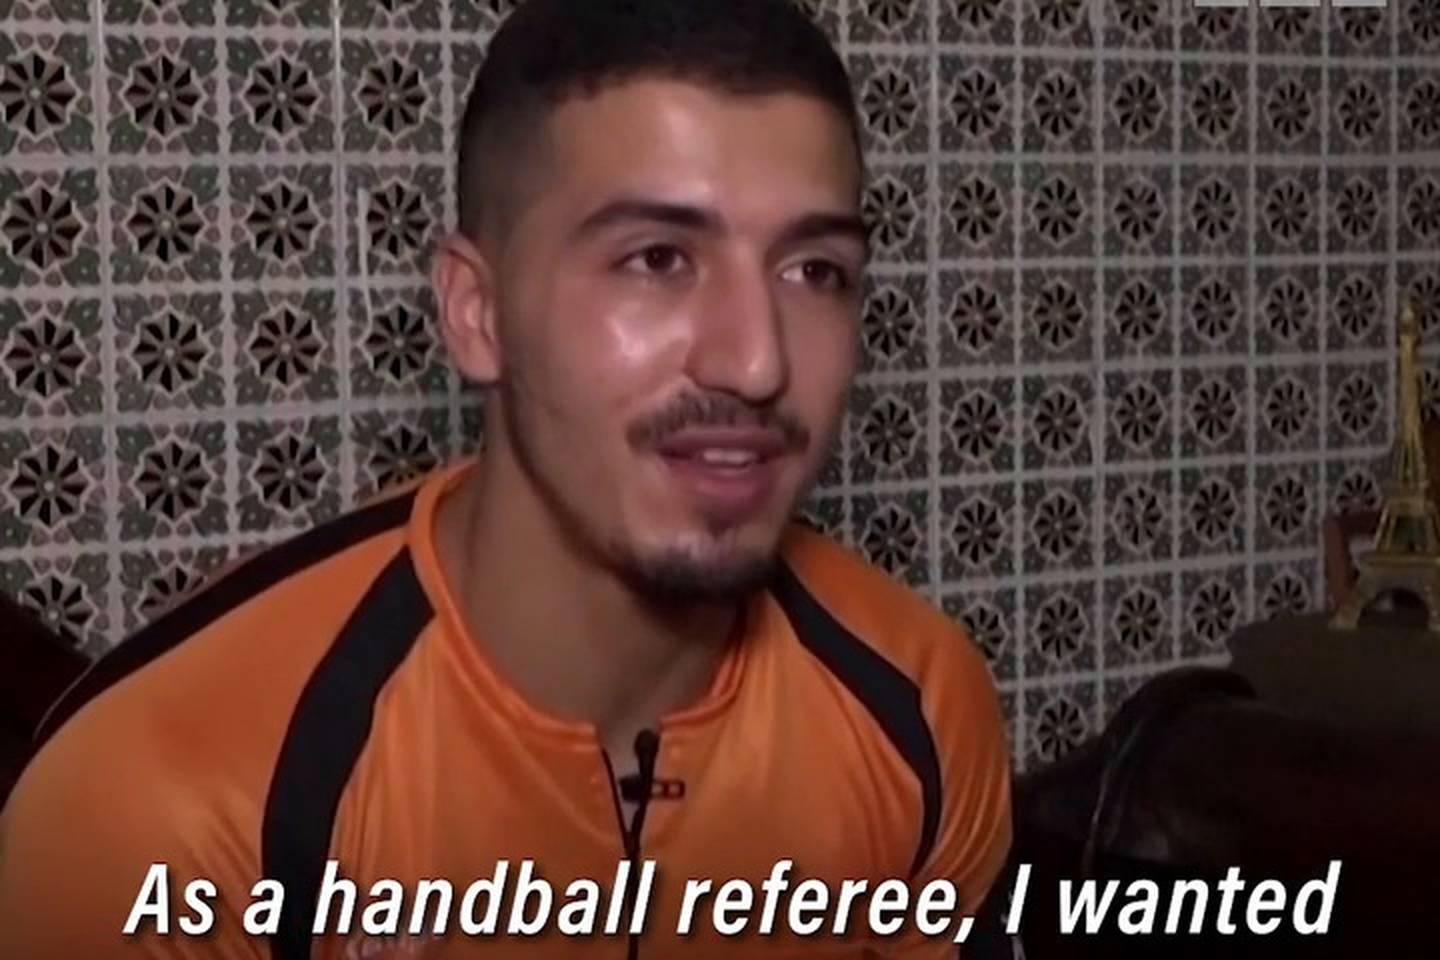 Referee hands out red cards to people violating social distancing norms